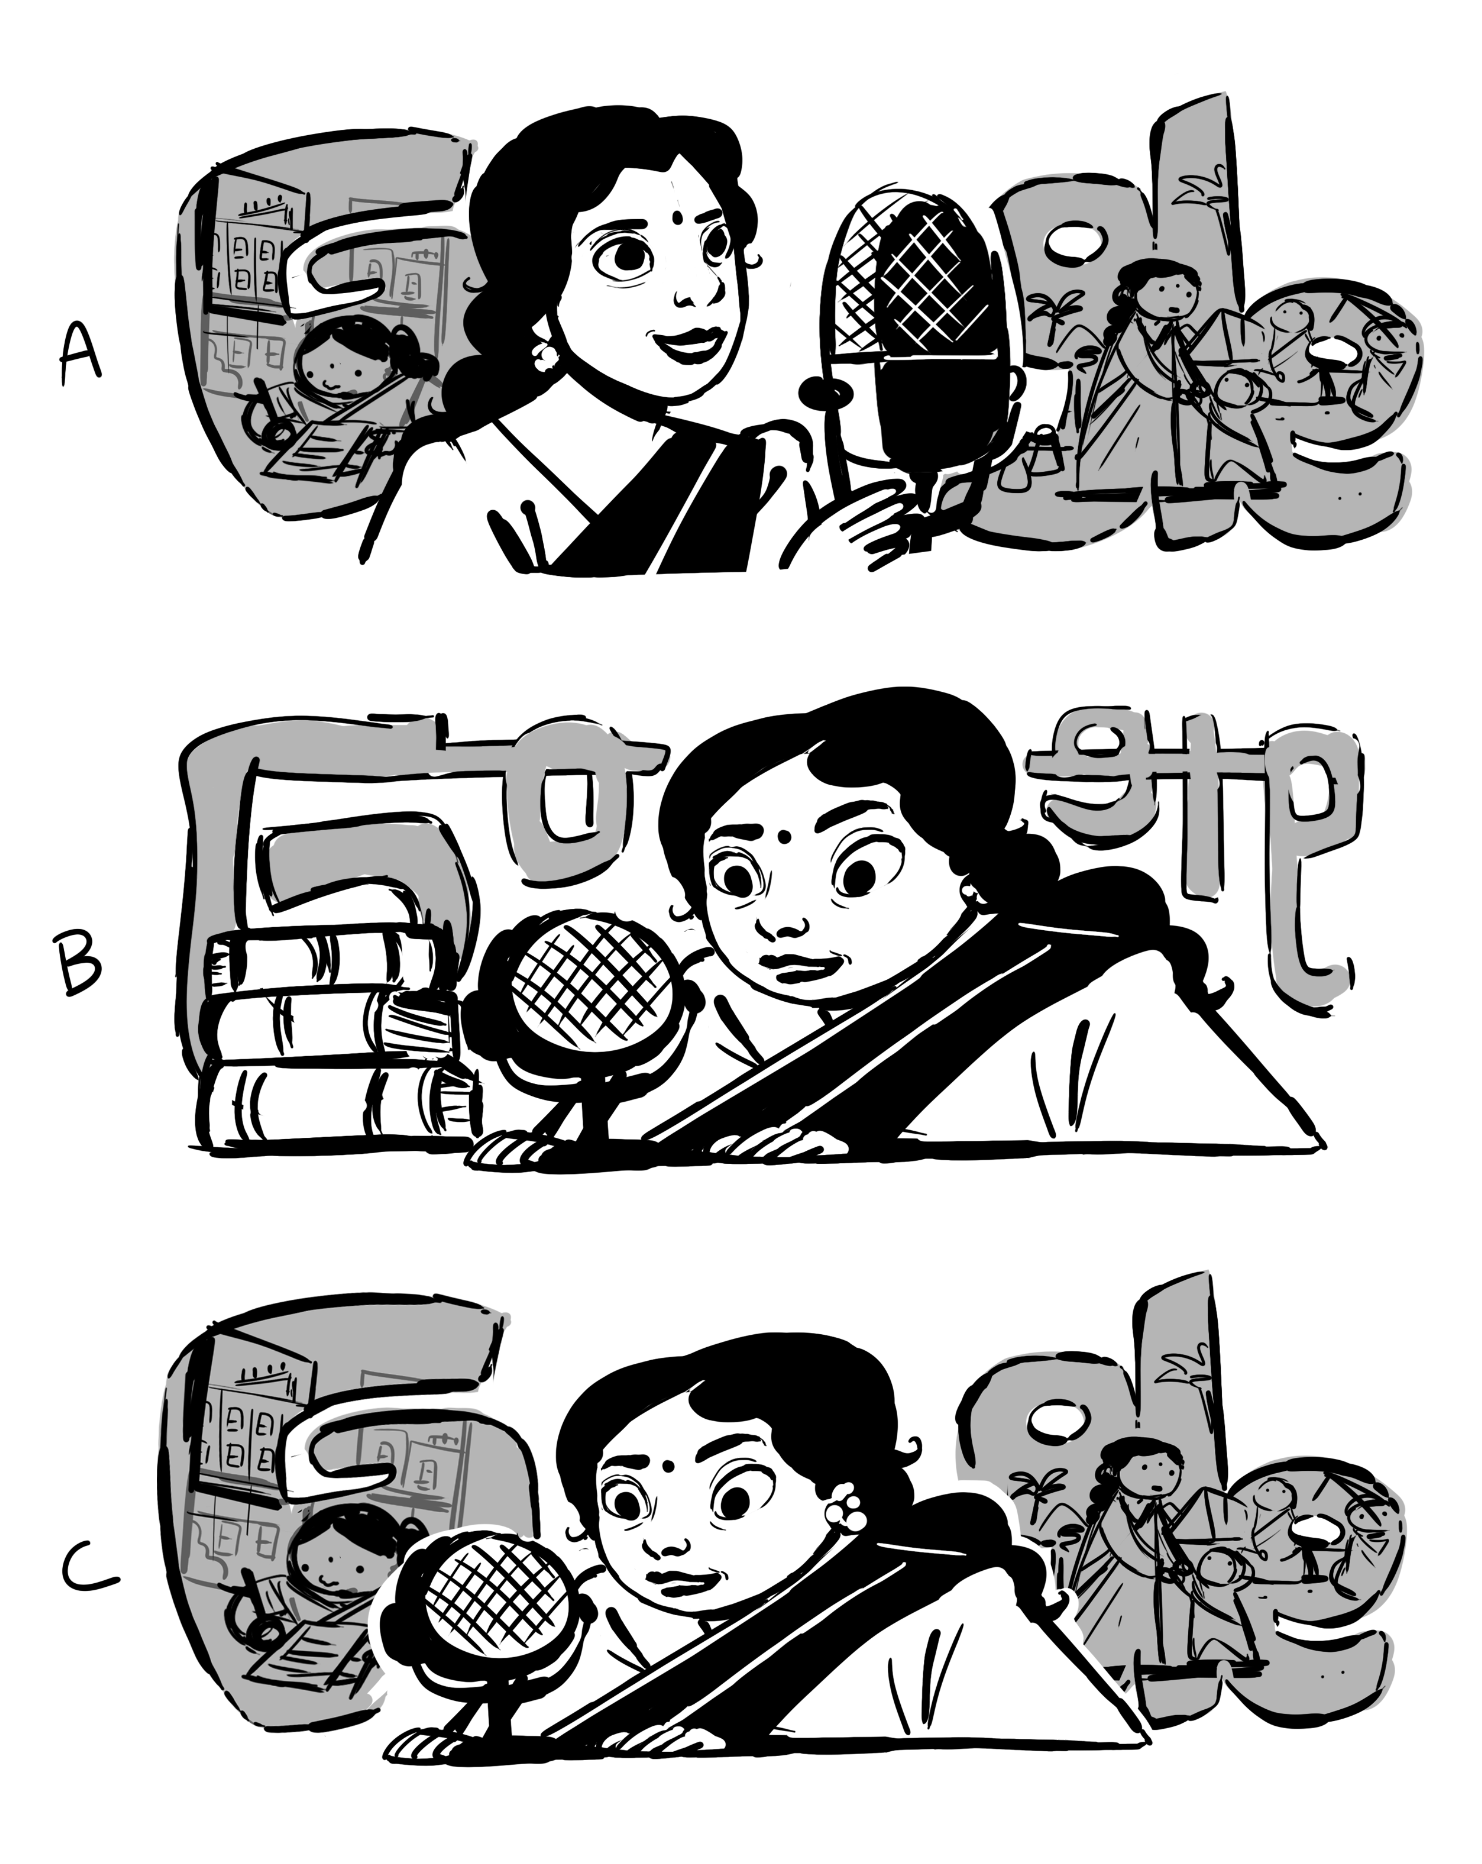 Three black and white sketches of Venu Chitale positioned with a microphone and the Google logo. The sketches are arraigned vertically labeled A through C. 